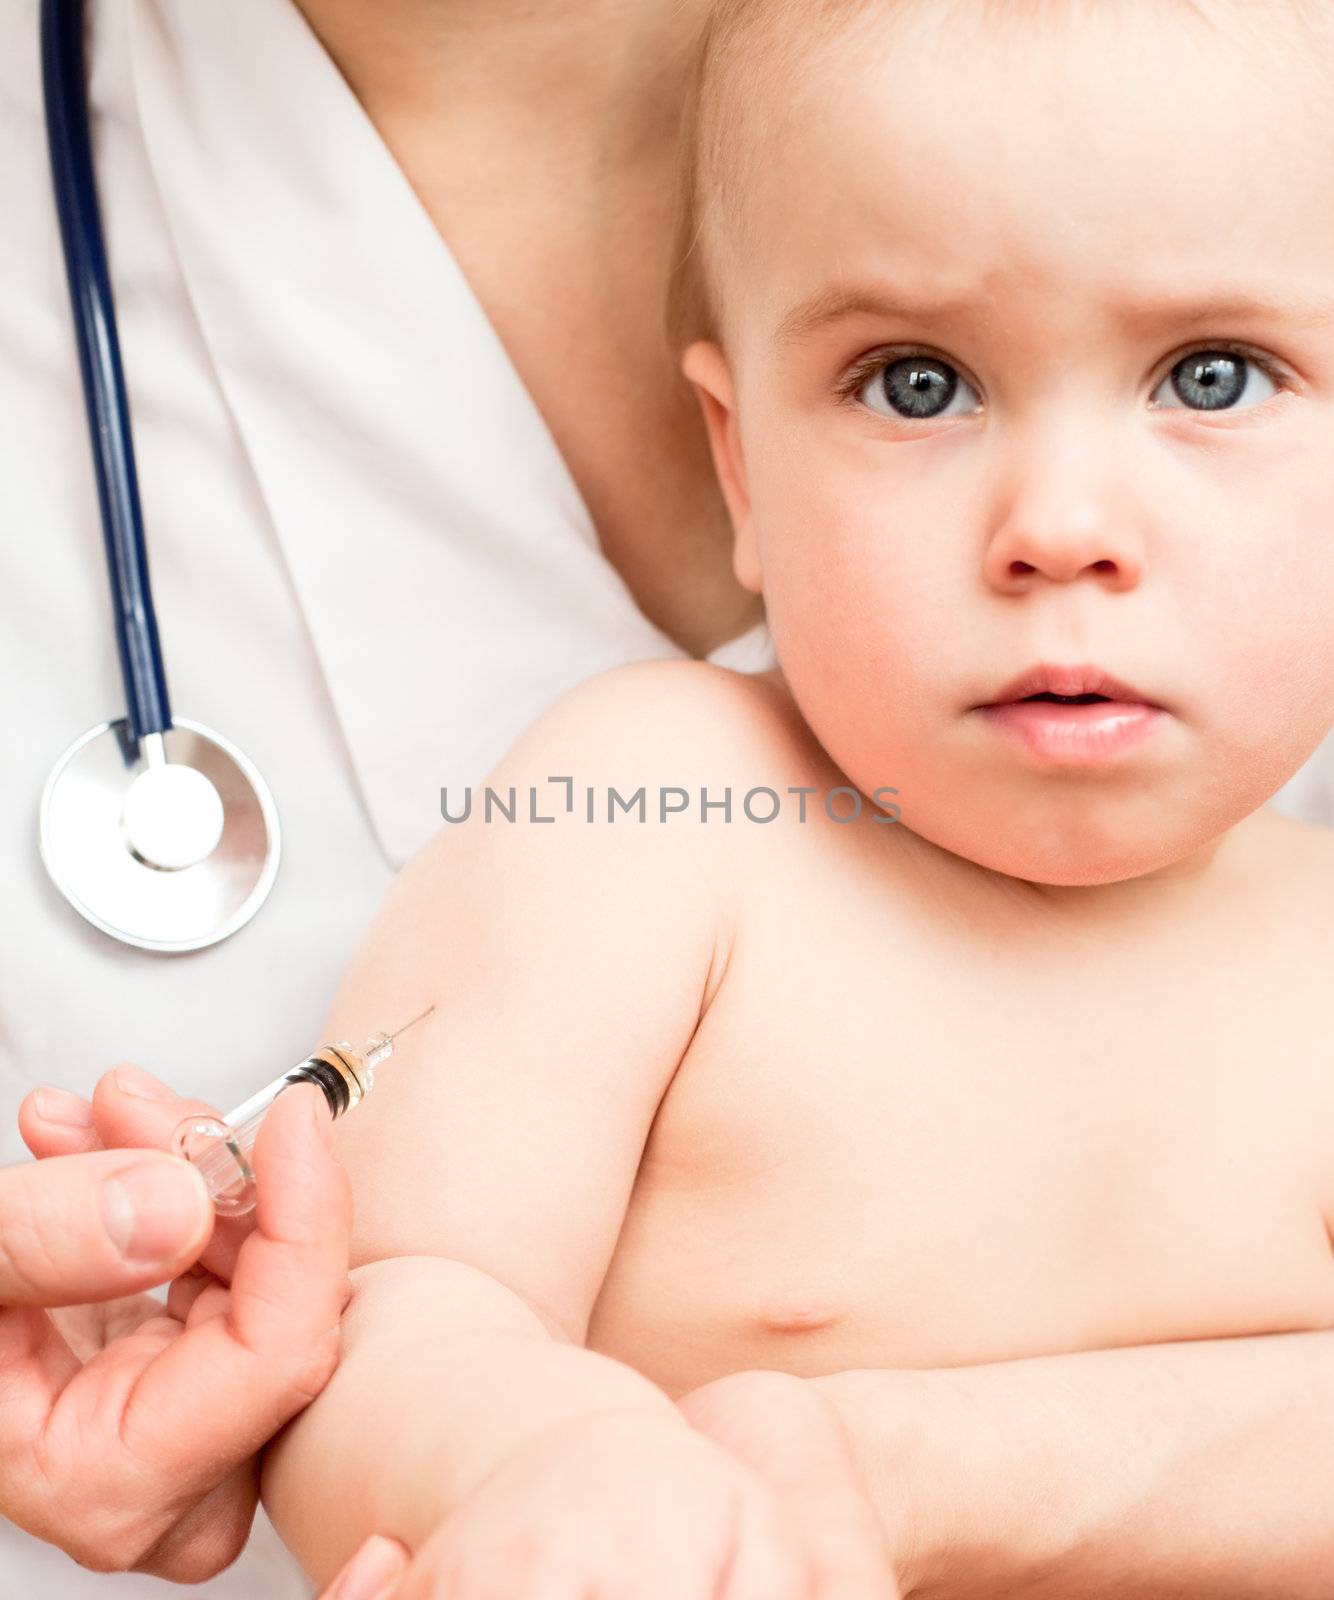 Doctor giving a child an intramuscular injection in arm, shallow DOF